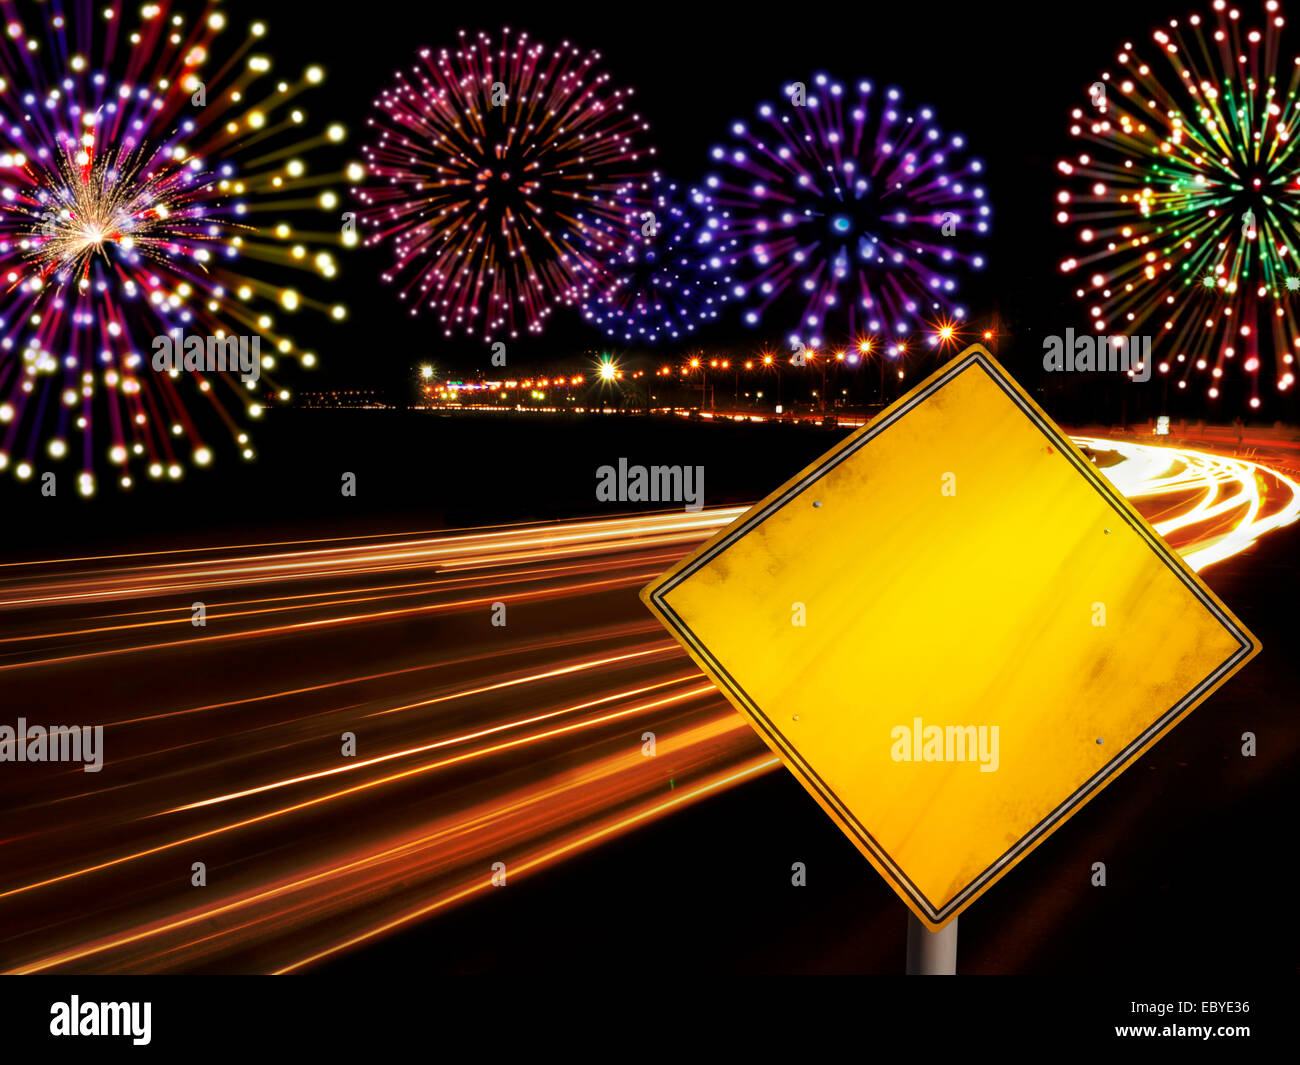 Happy New Year fireworks and city cars highway lights with copy space in yellow road sign. Stock Photo